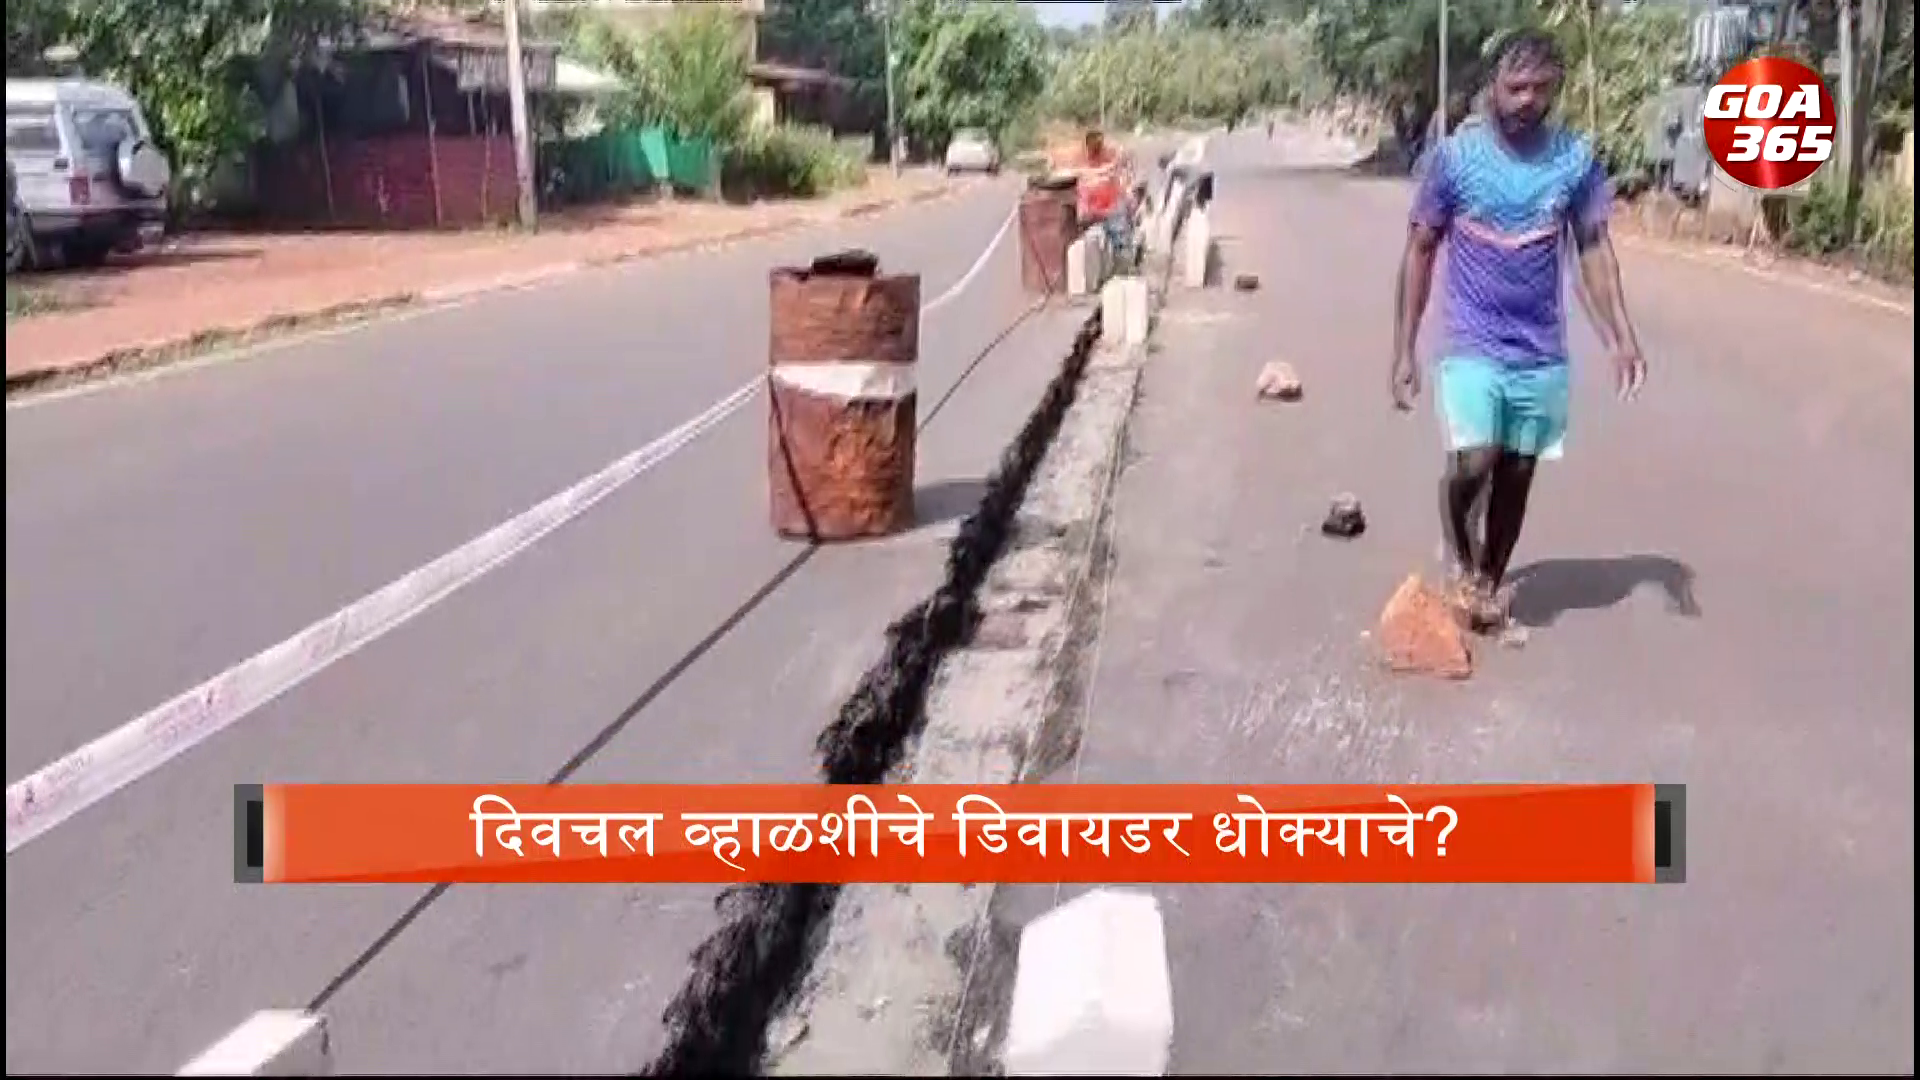 What Was the Logic Behind These Dividers In Bicholim? || KONKANI || Goa365 TV